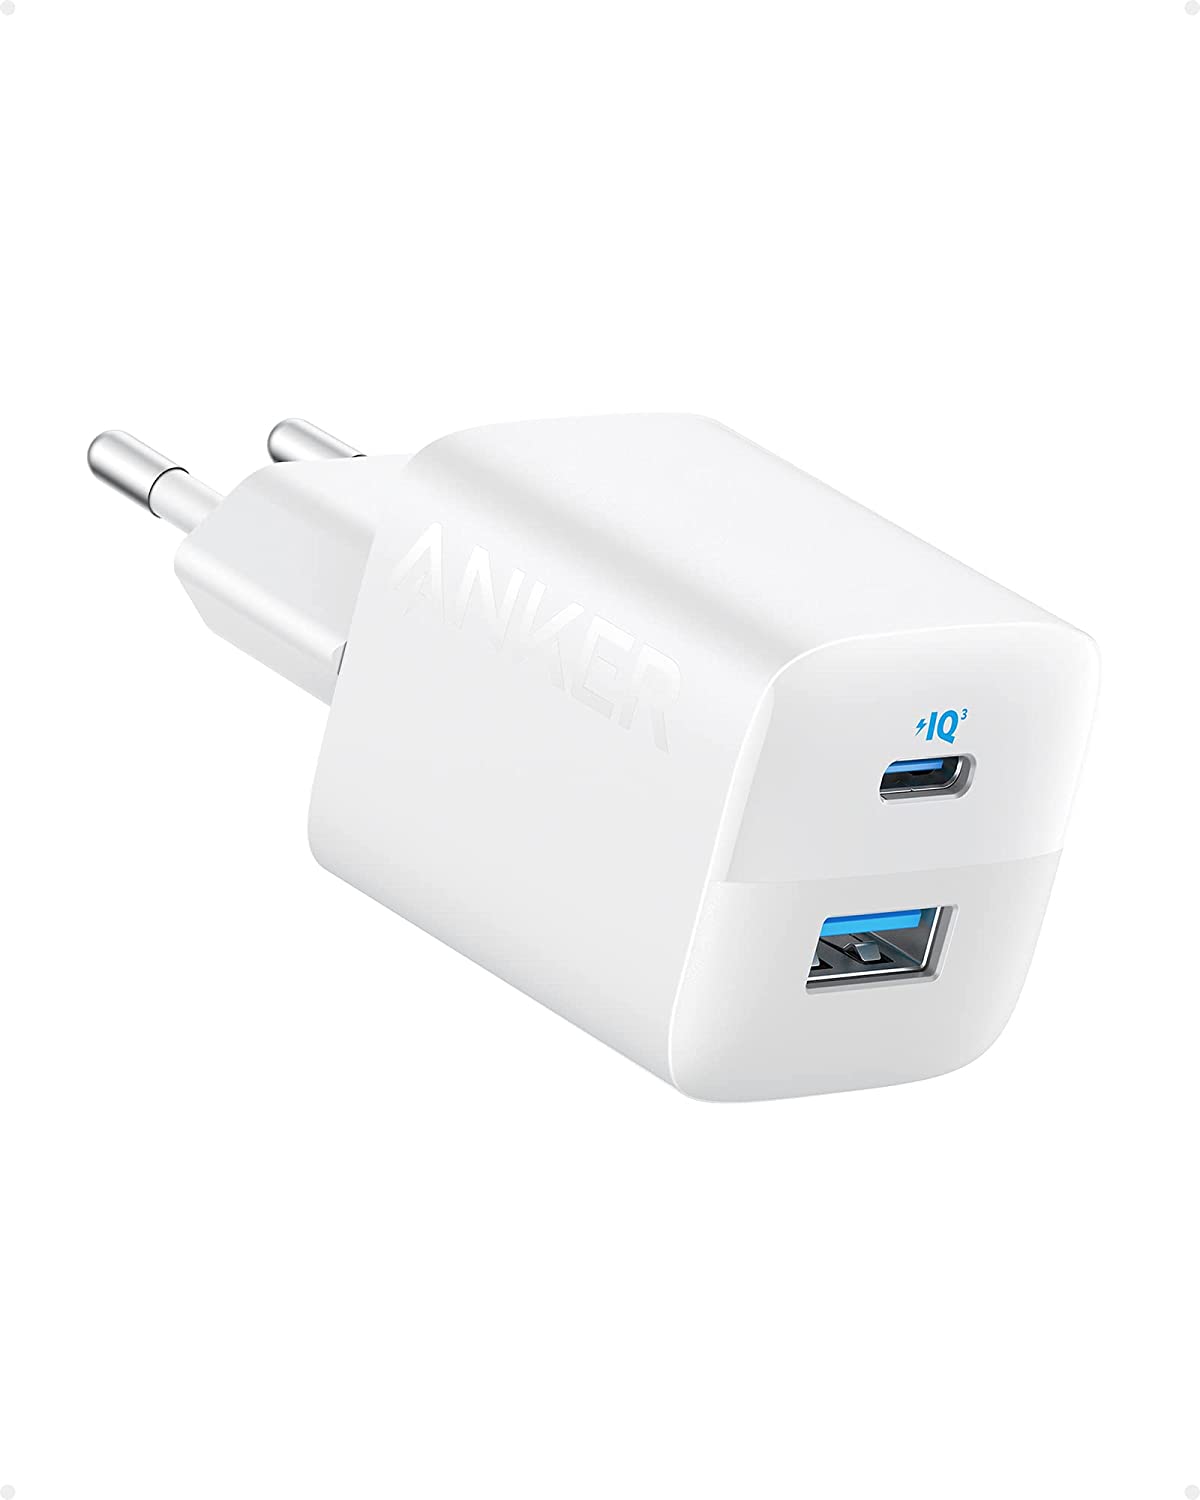 Chargeurs - Anker Europe - Anker FR